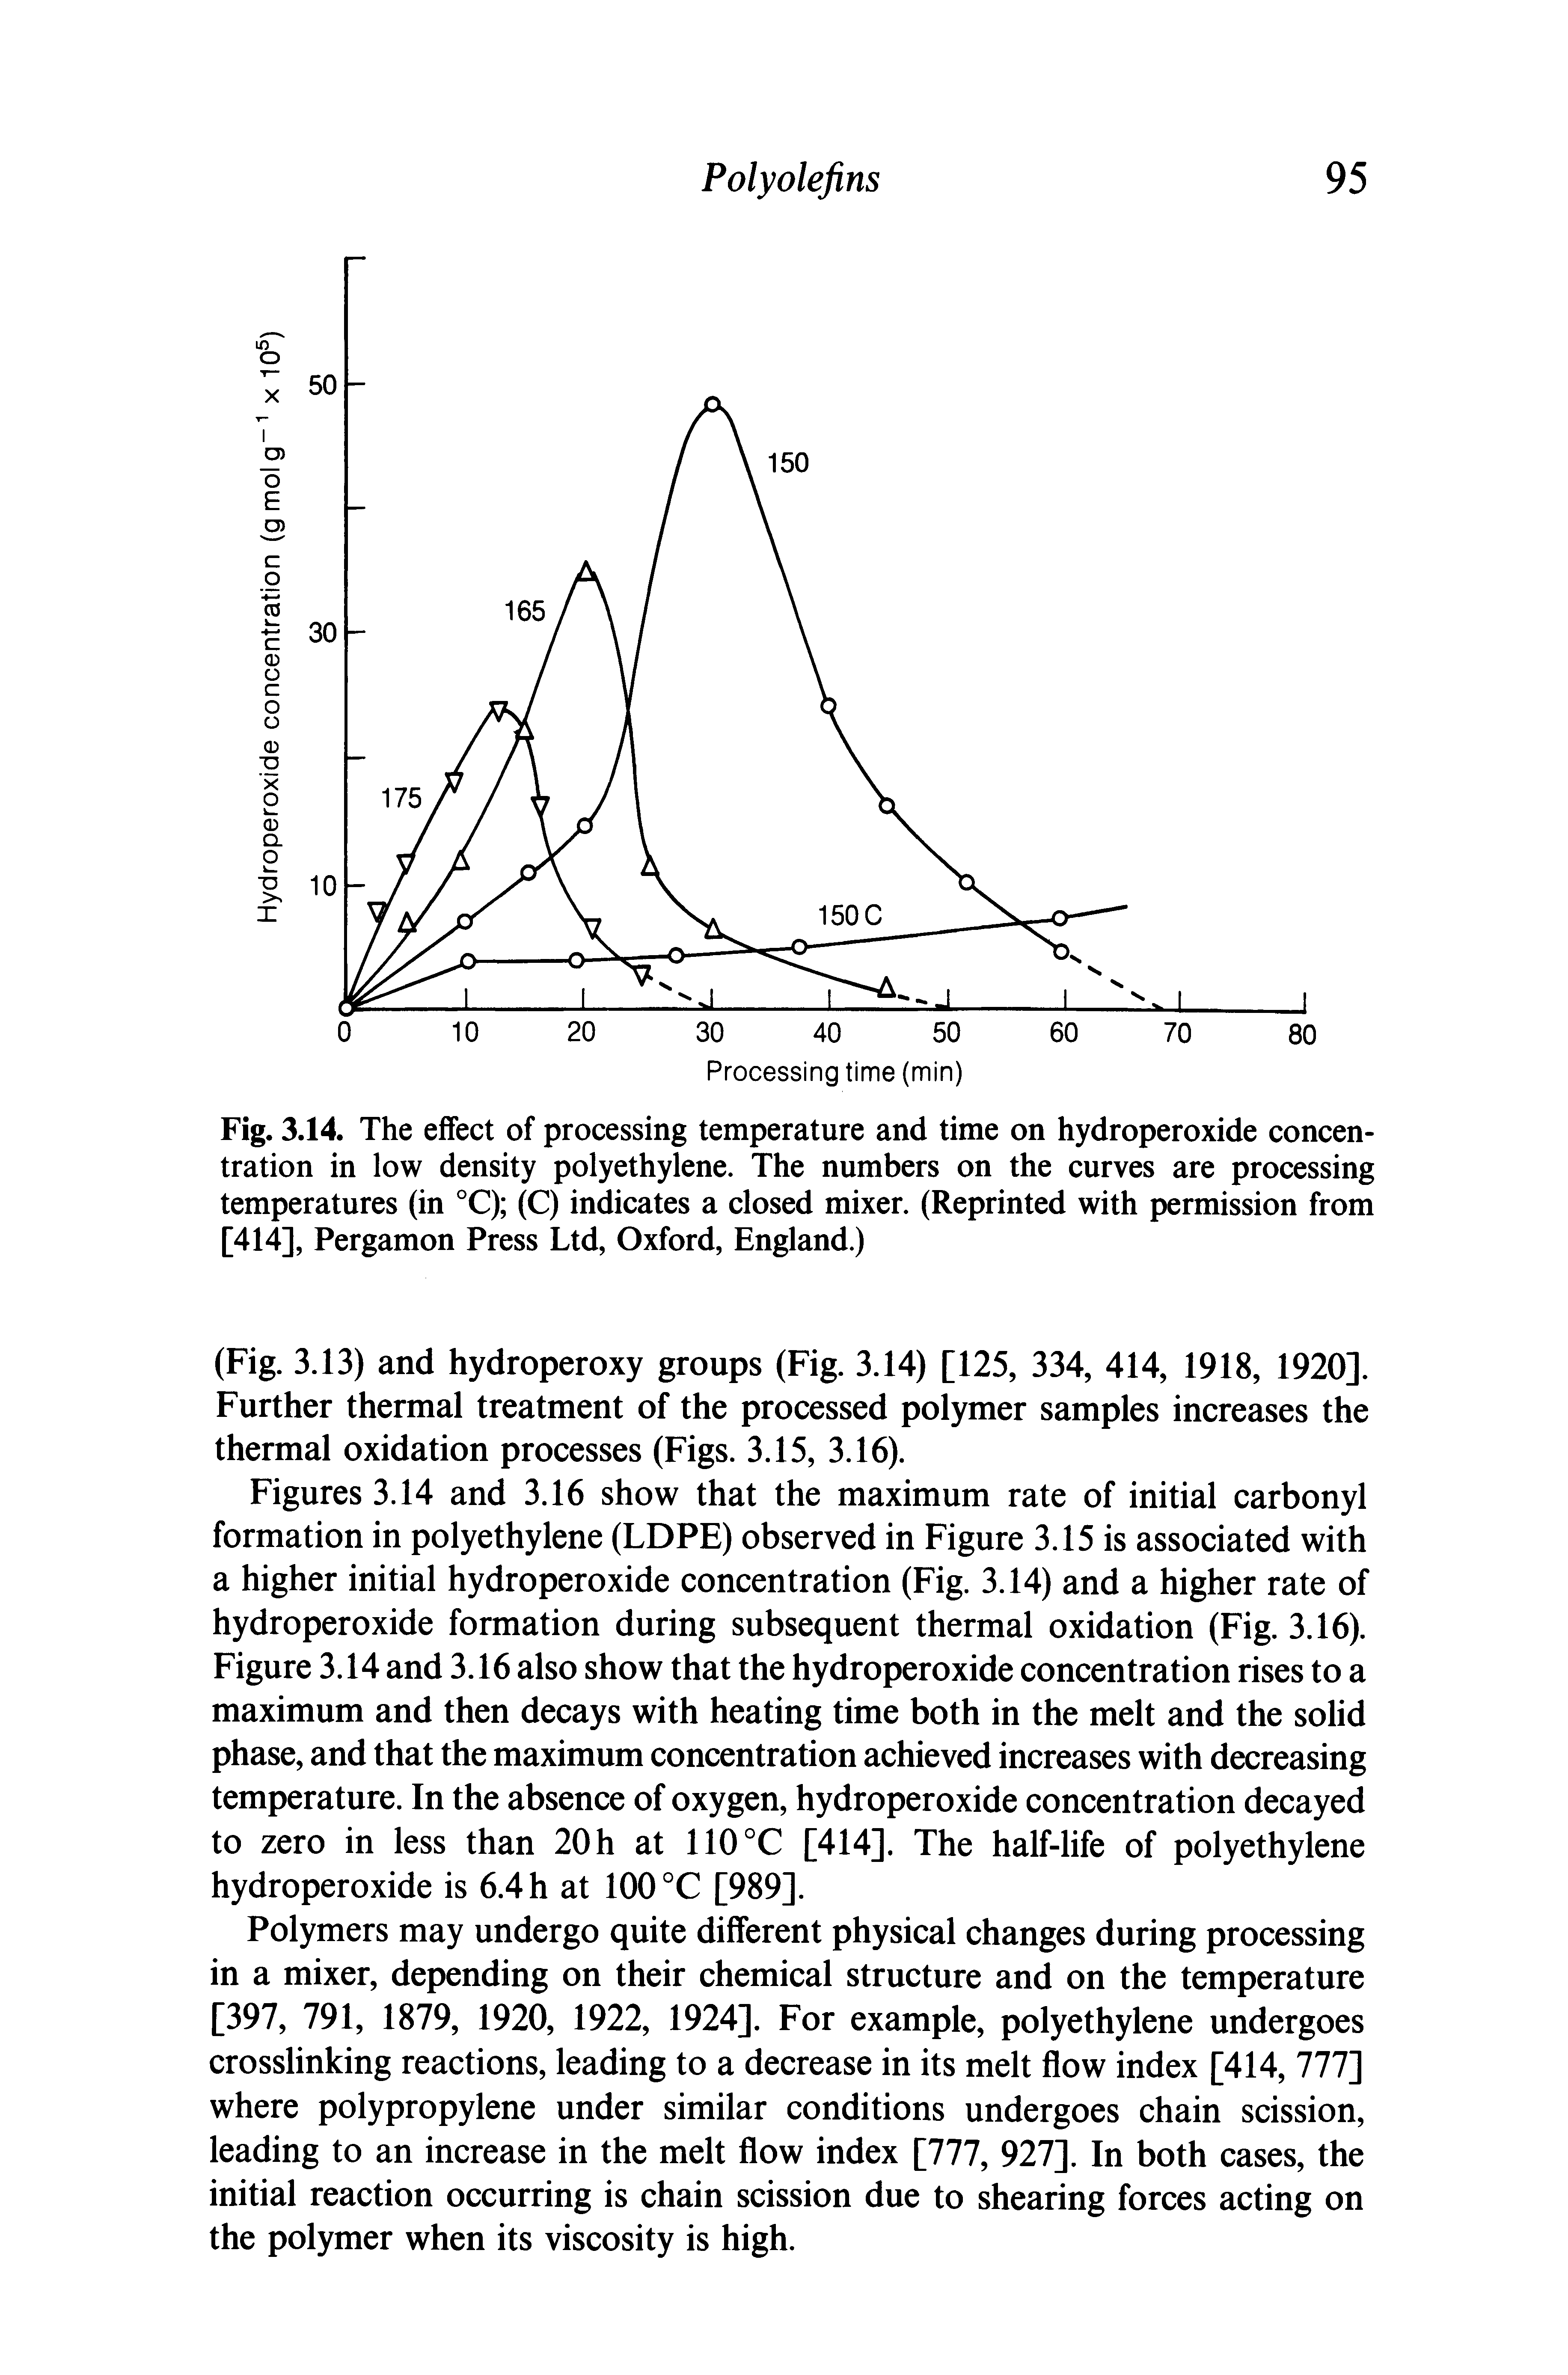 Fig. 3.14. The effect of processing temperature and time on hydroperoxide concentration in low density polyethylene. The numbers on the curves are processing temperatures (in °C) (C) indicates a closed mixer. (Reprinted with permission from [414], Pergamon Press Ltd, Oxford, England.)...